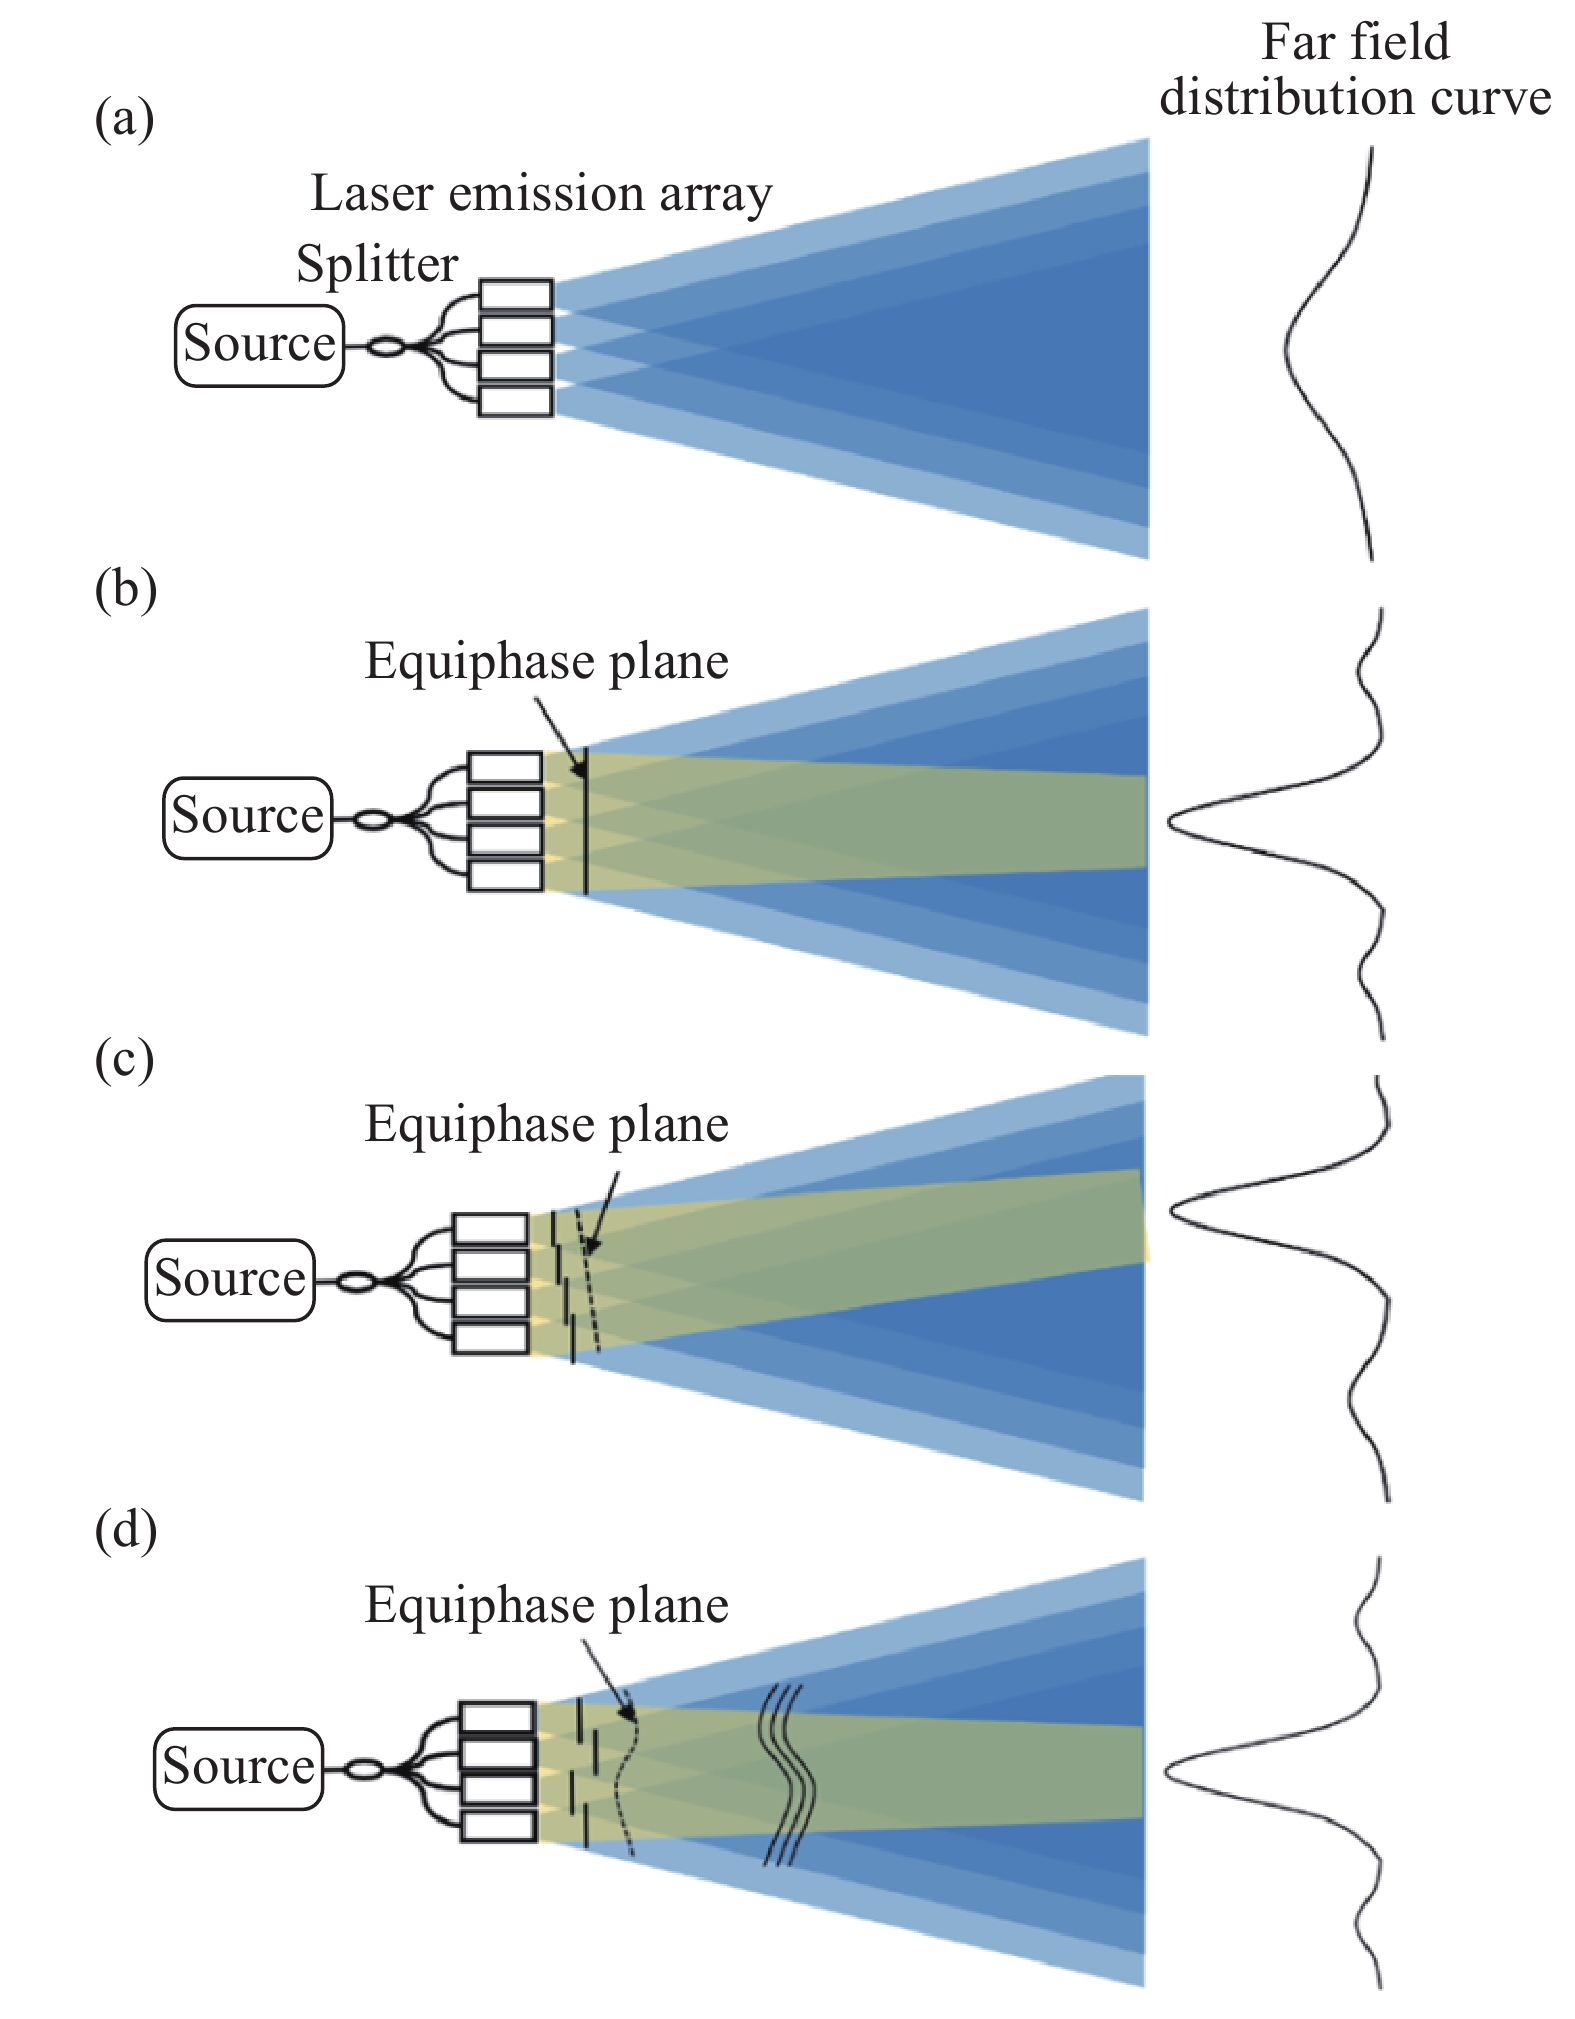 Schematic of the optical phased array technology in beam launch